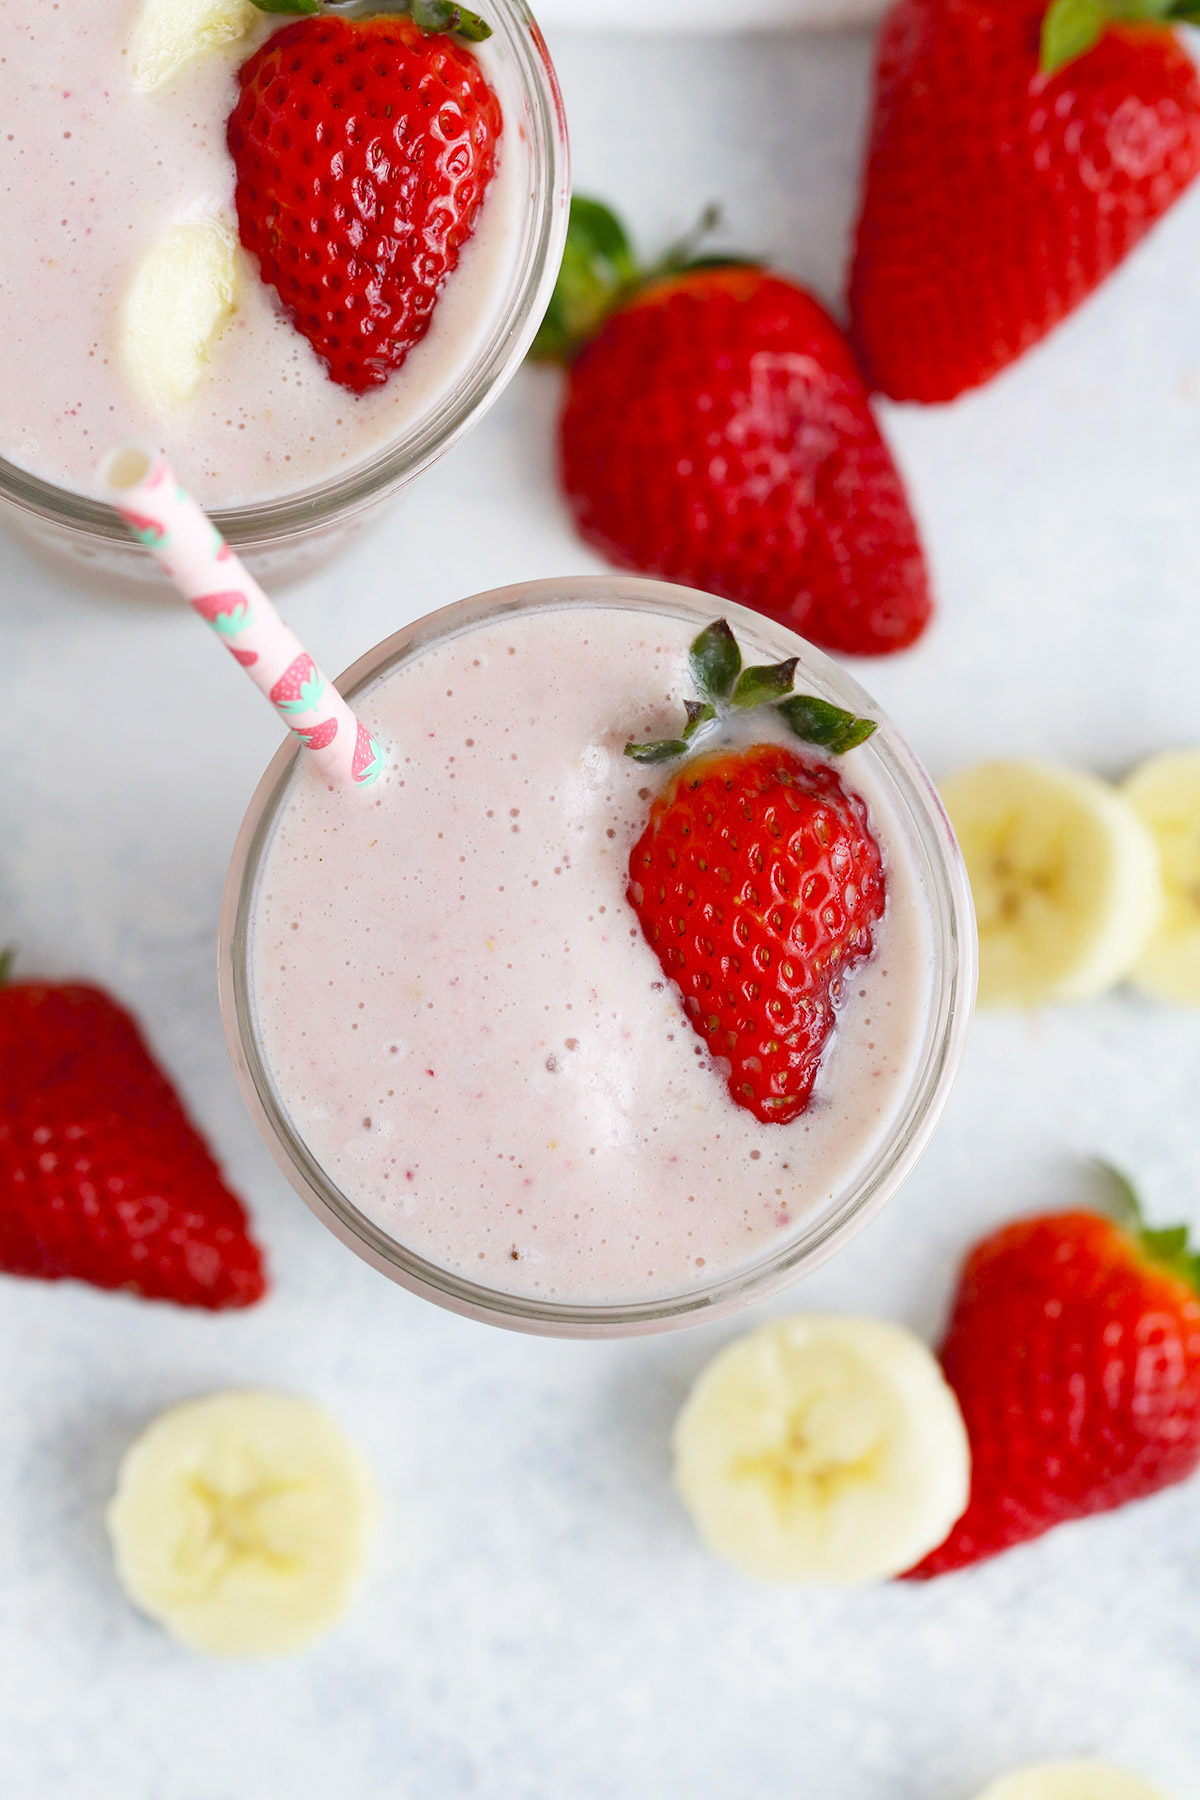 Strawberry Banana Smoothie from One Lovely Life